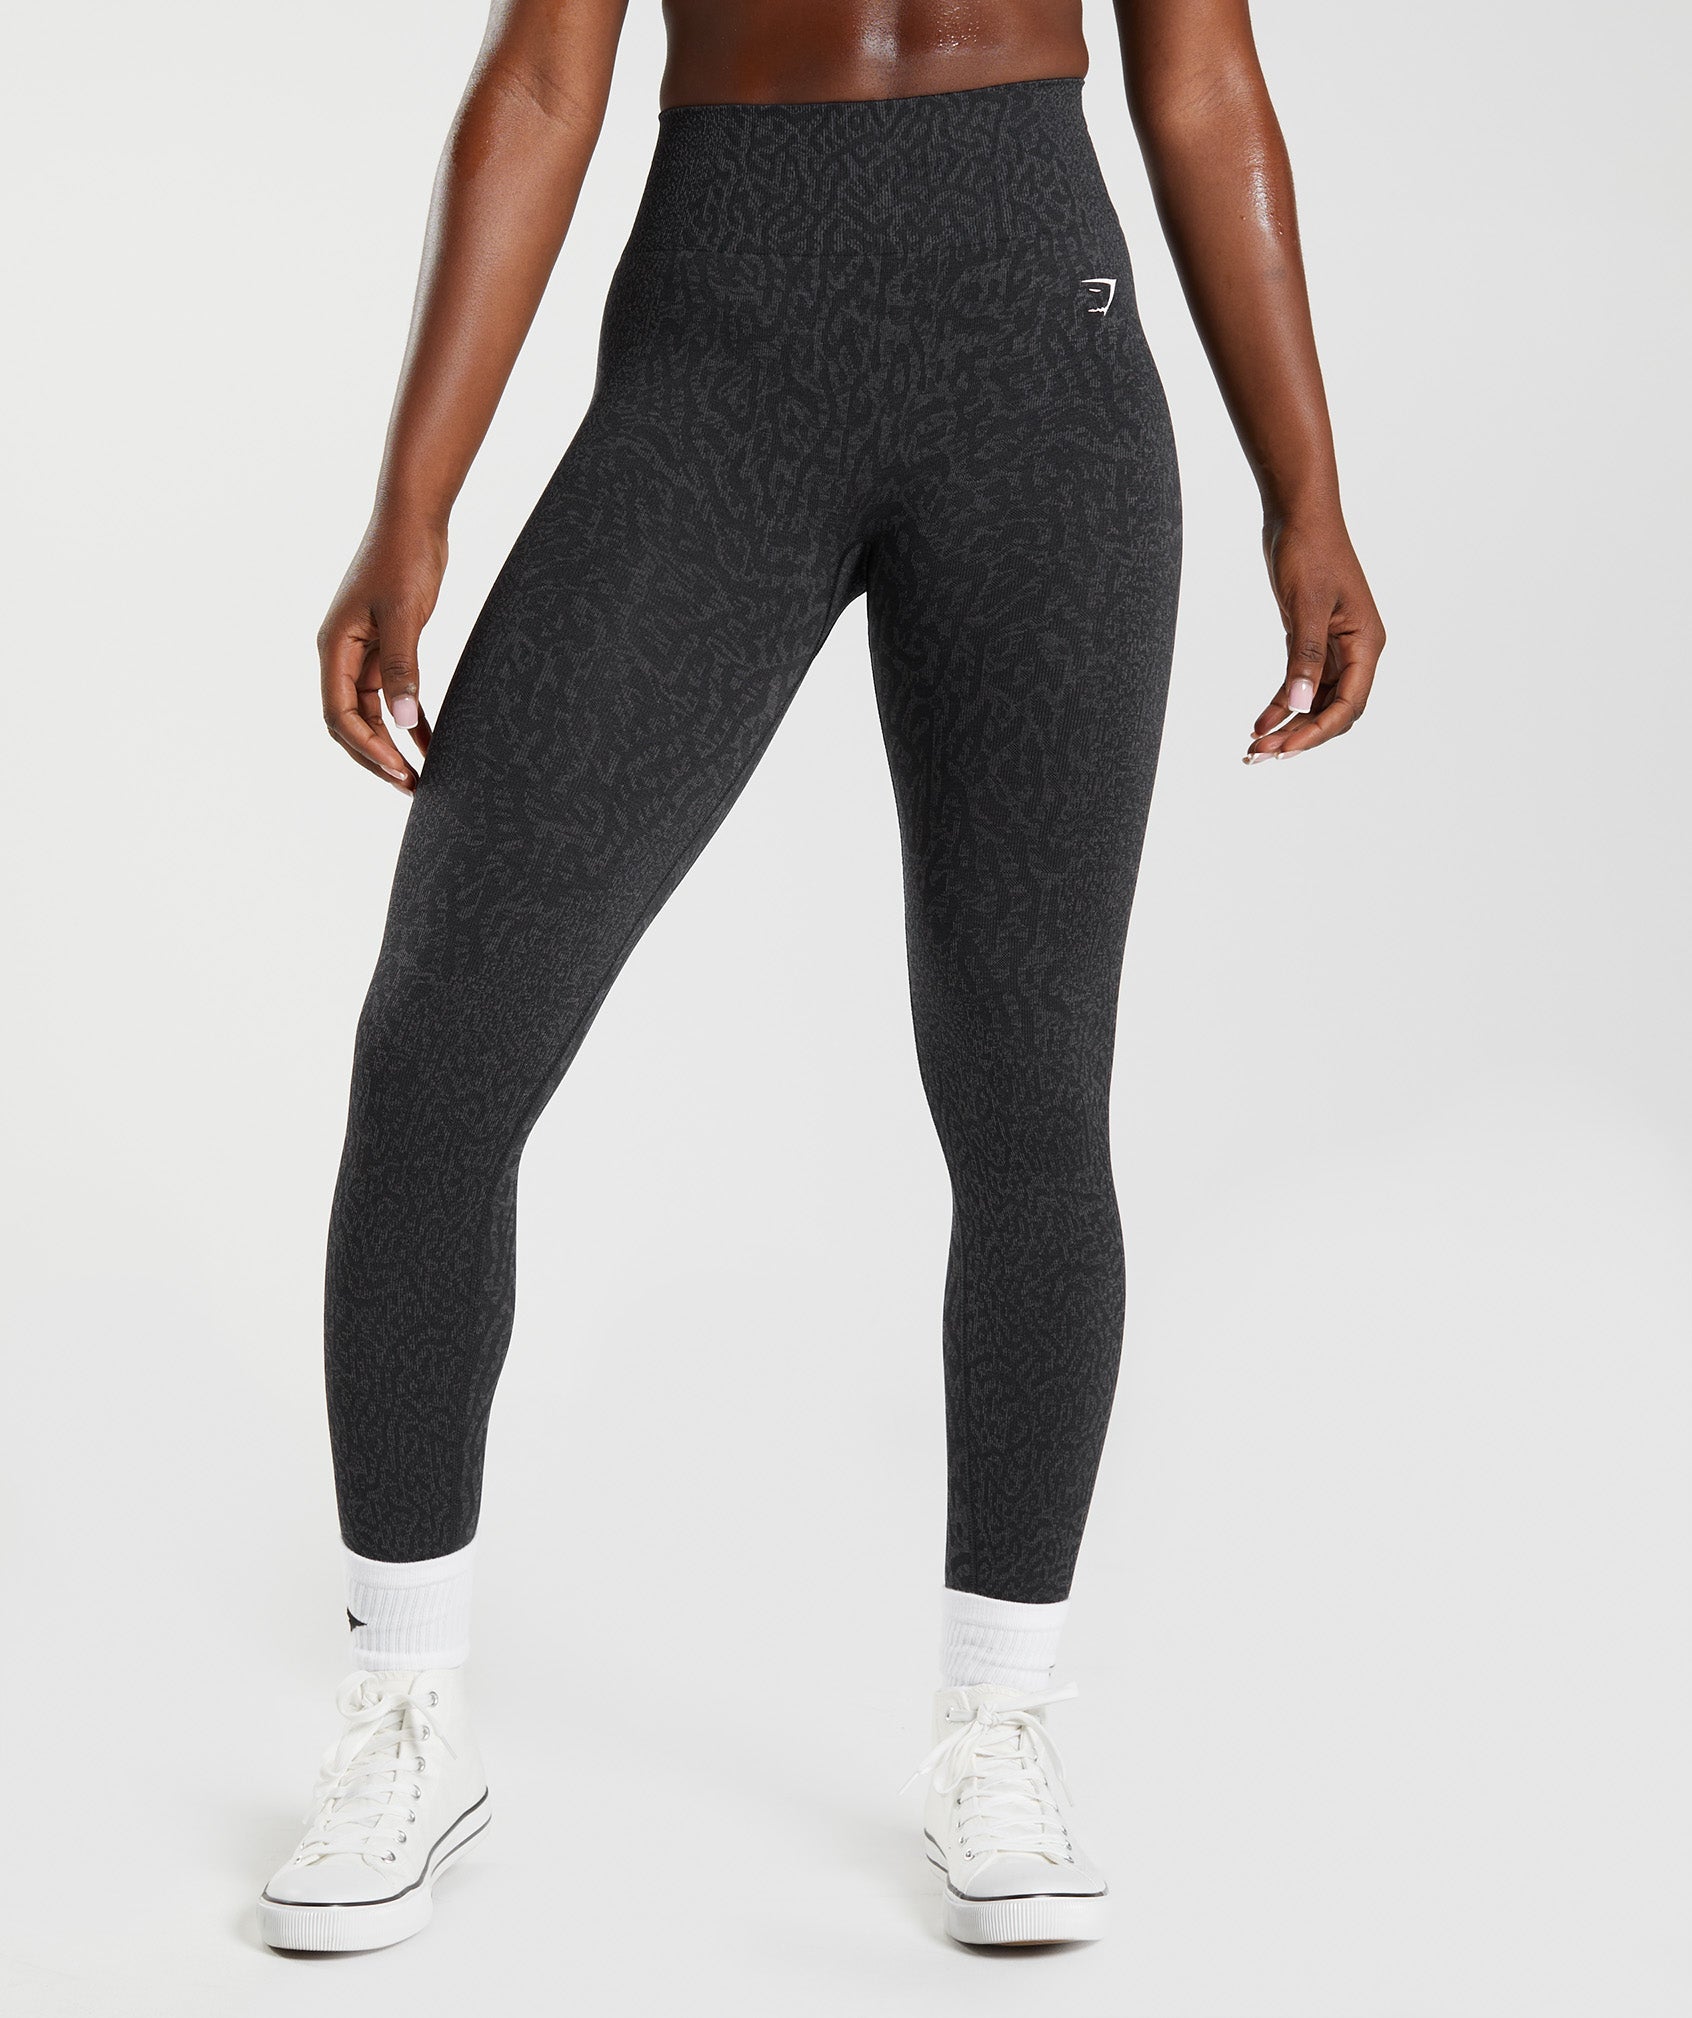 Gymshark Fit Seamless Leggings Black Size M - $29 (17% Off Retail) - From  Andrea